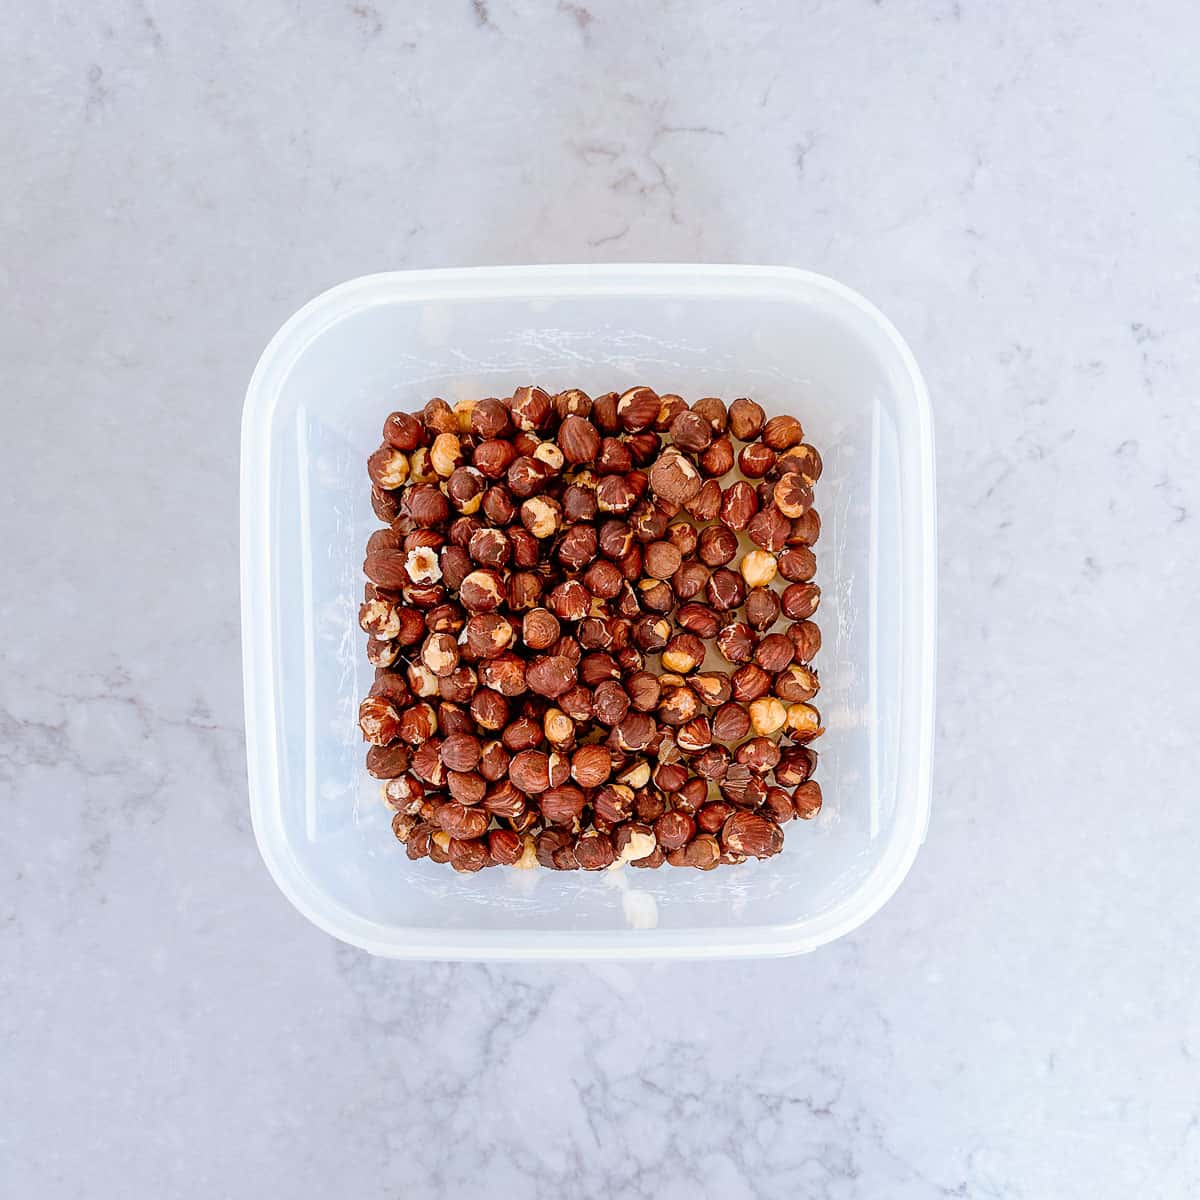 Raw hazelnuts in a plastic container on a marble benchtop.